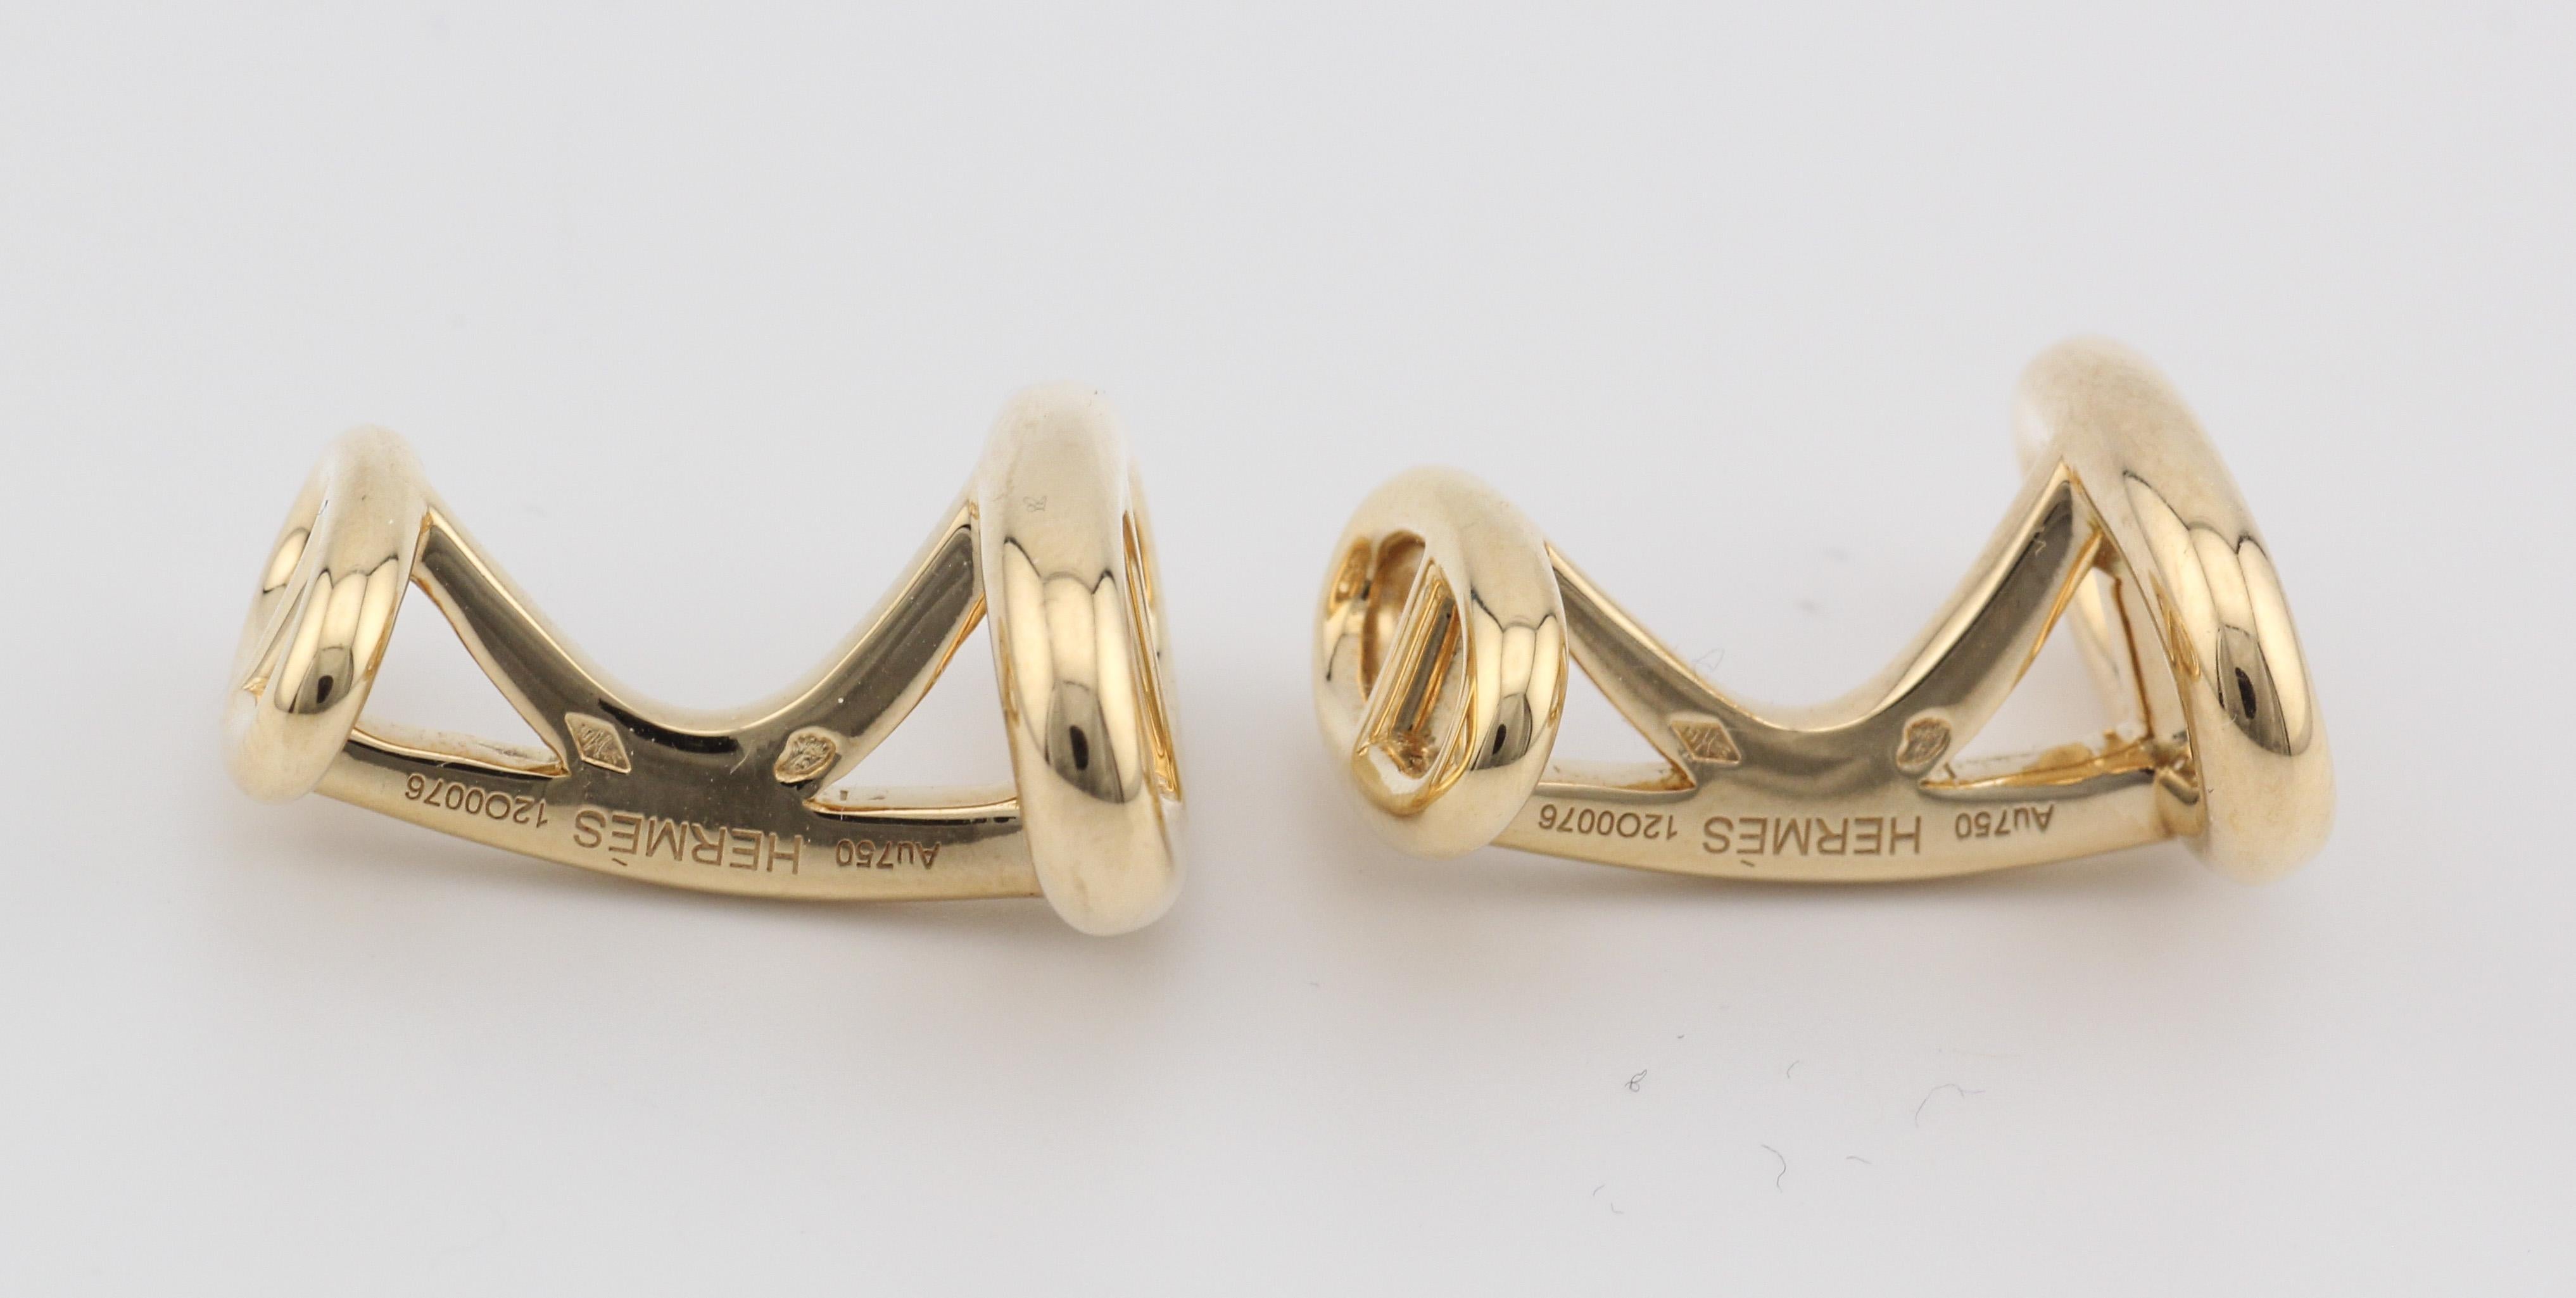 Hermes Chaine D'Ancre 18K Rose Gold Cufflinks In Good Condition For Sale In Bellmore, NY